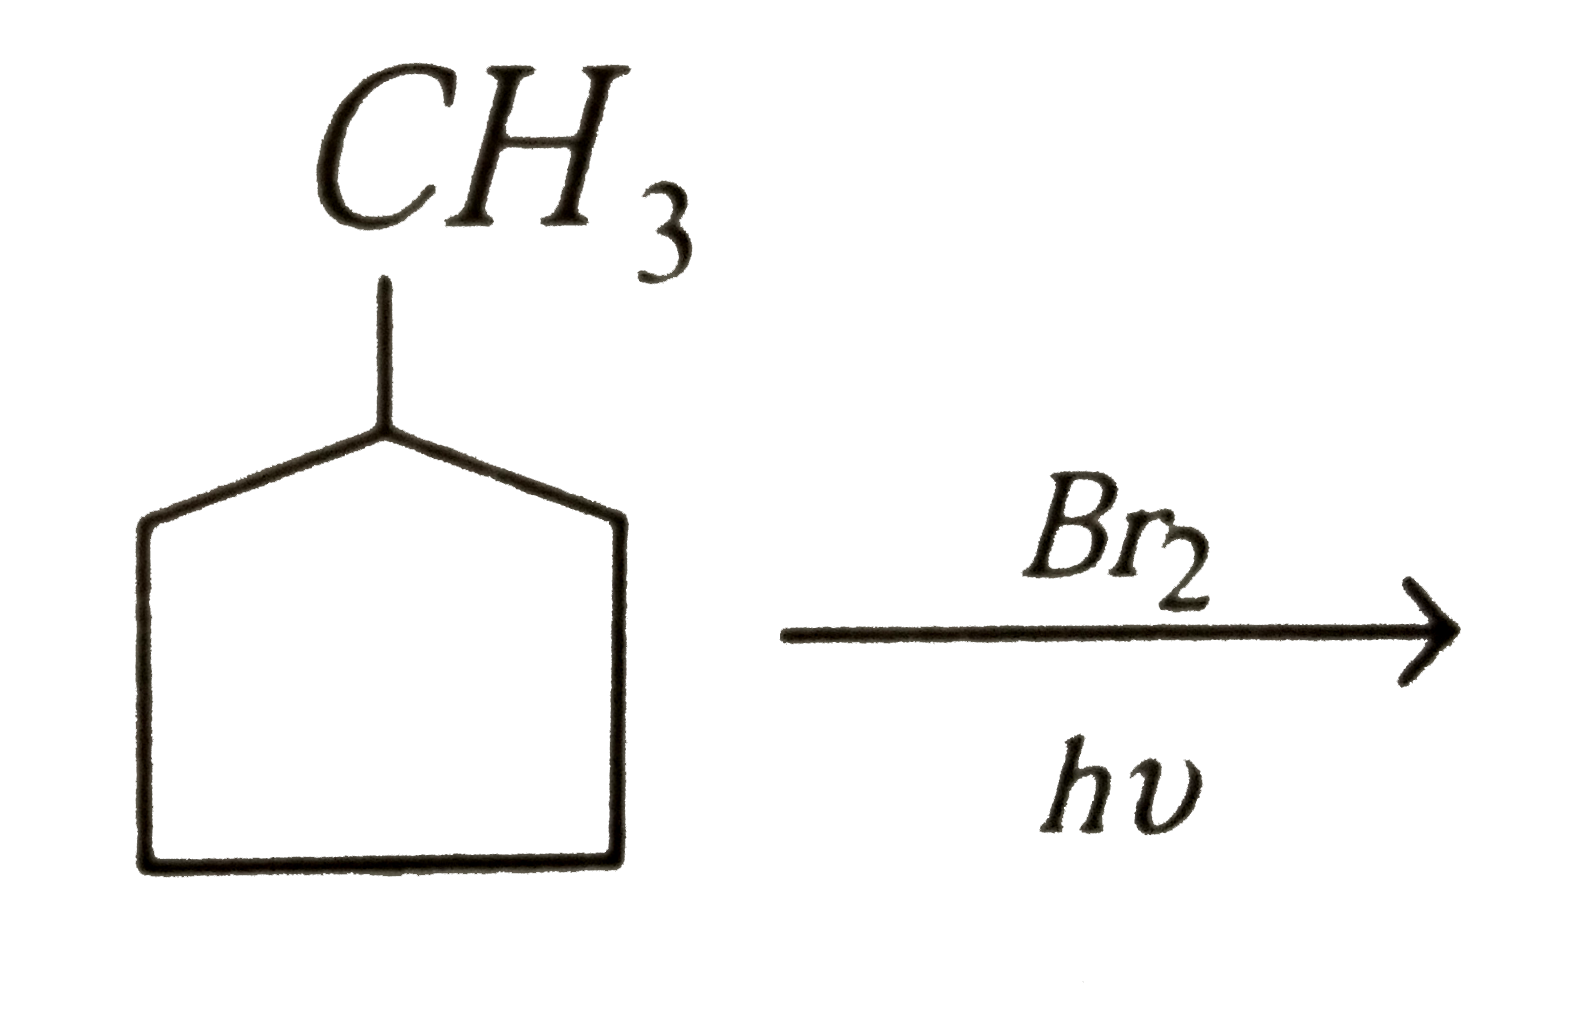 In the following reaction ,  the major product obtained is